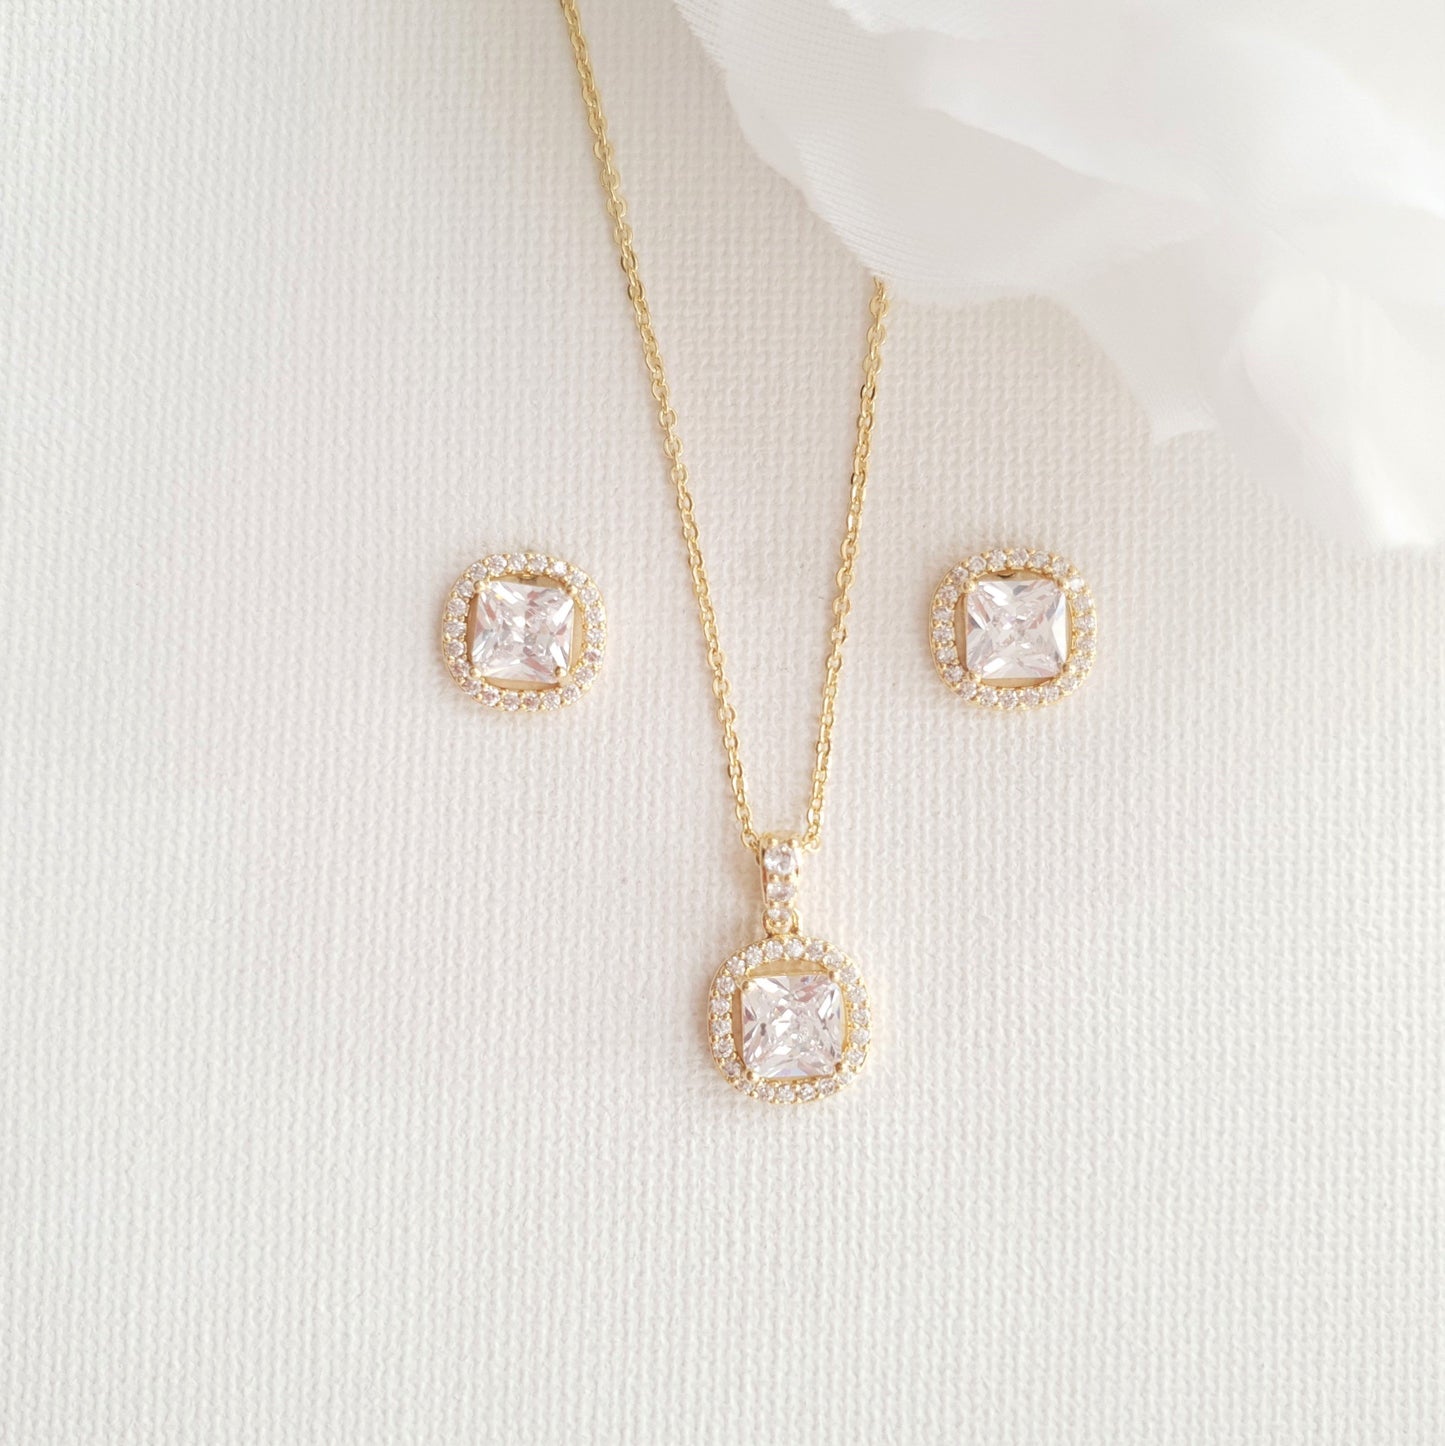 Earrings and Necklace Bridesmaids Jewelry Set-Piper